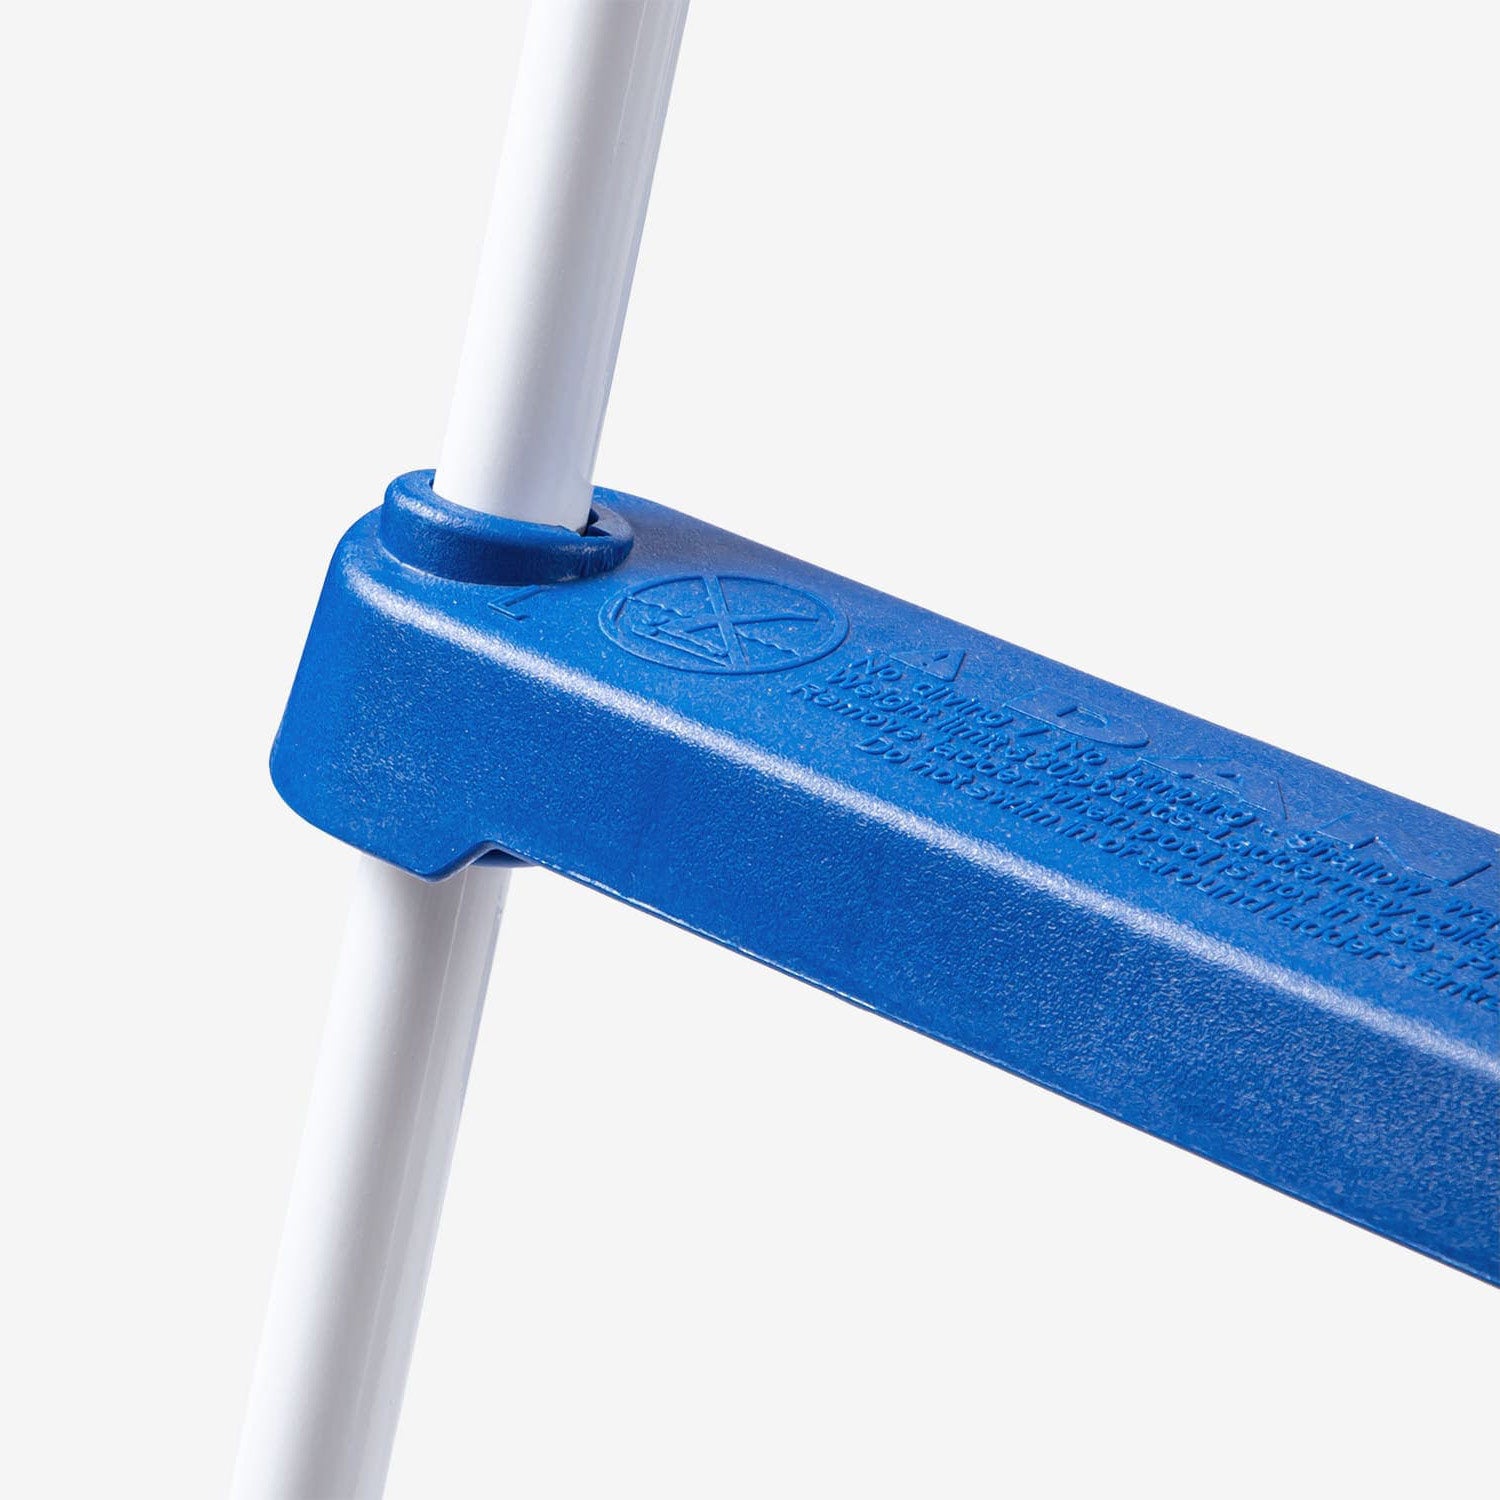 Funsicle 52" SureStep Ladder close up view